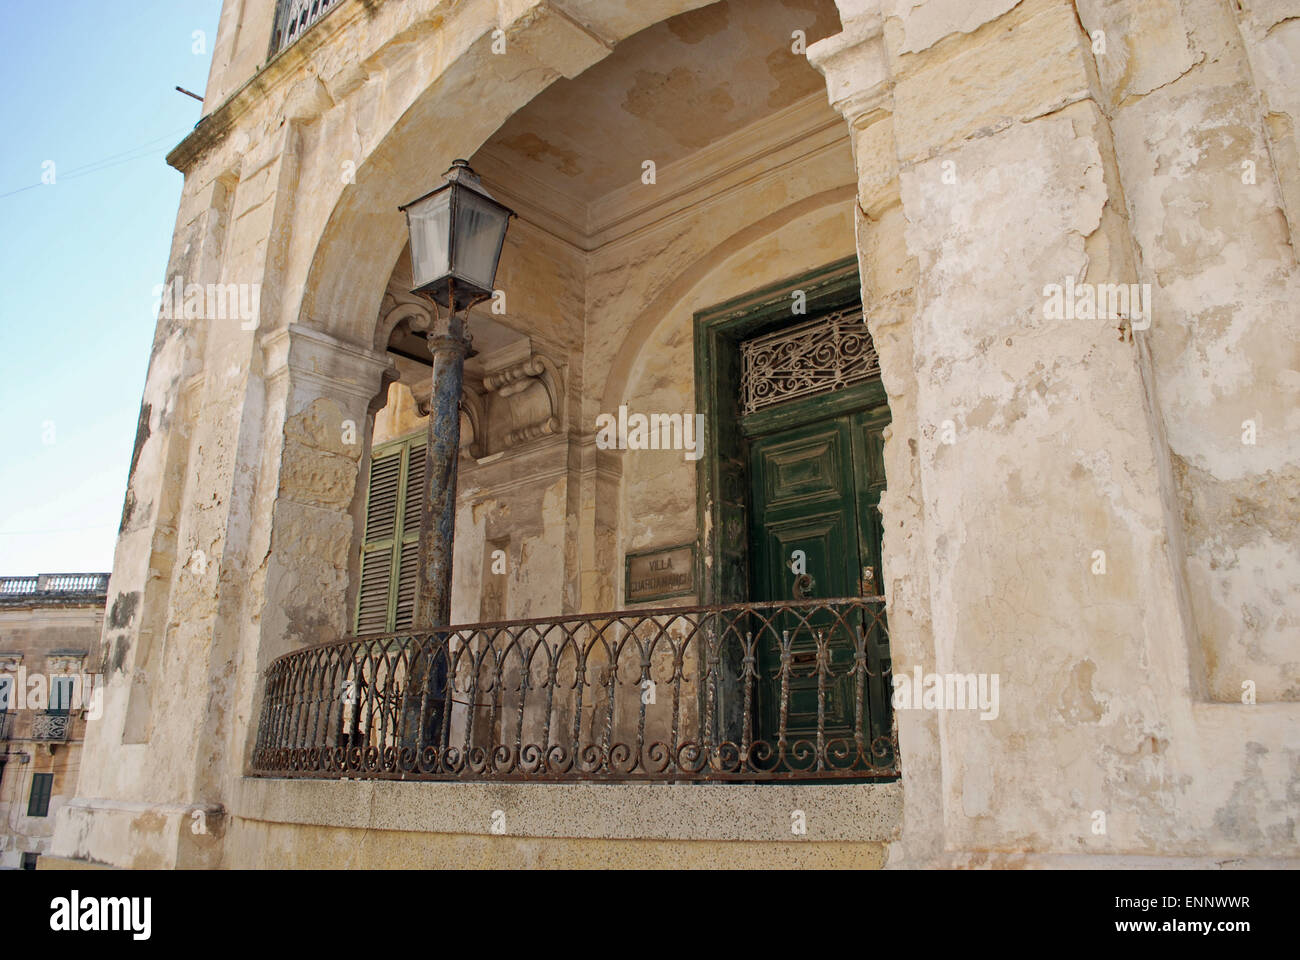 Villa Guardamangia in Valetta, Malta, the former residence of Queen Elizabeth II and Prince Philip, home to the Royal couple from 1949 to 1951. Stock Photo